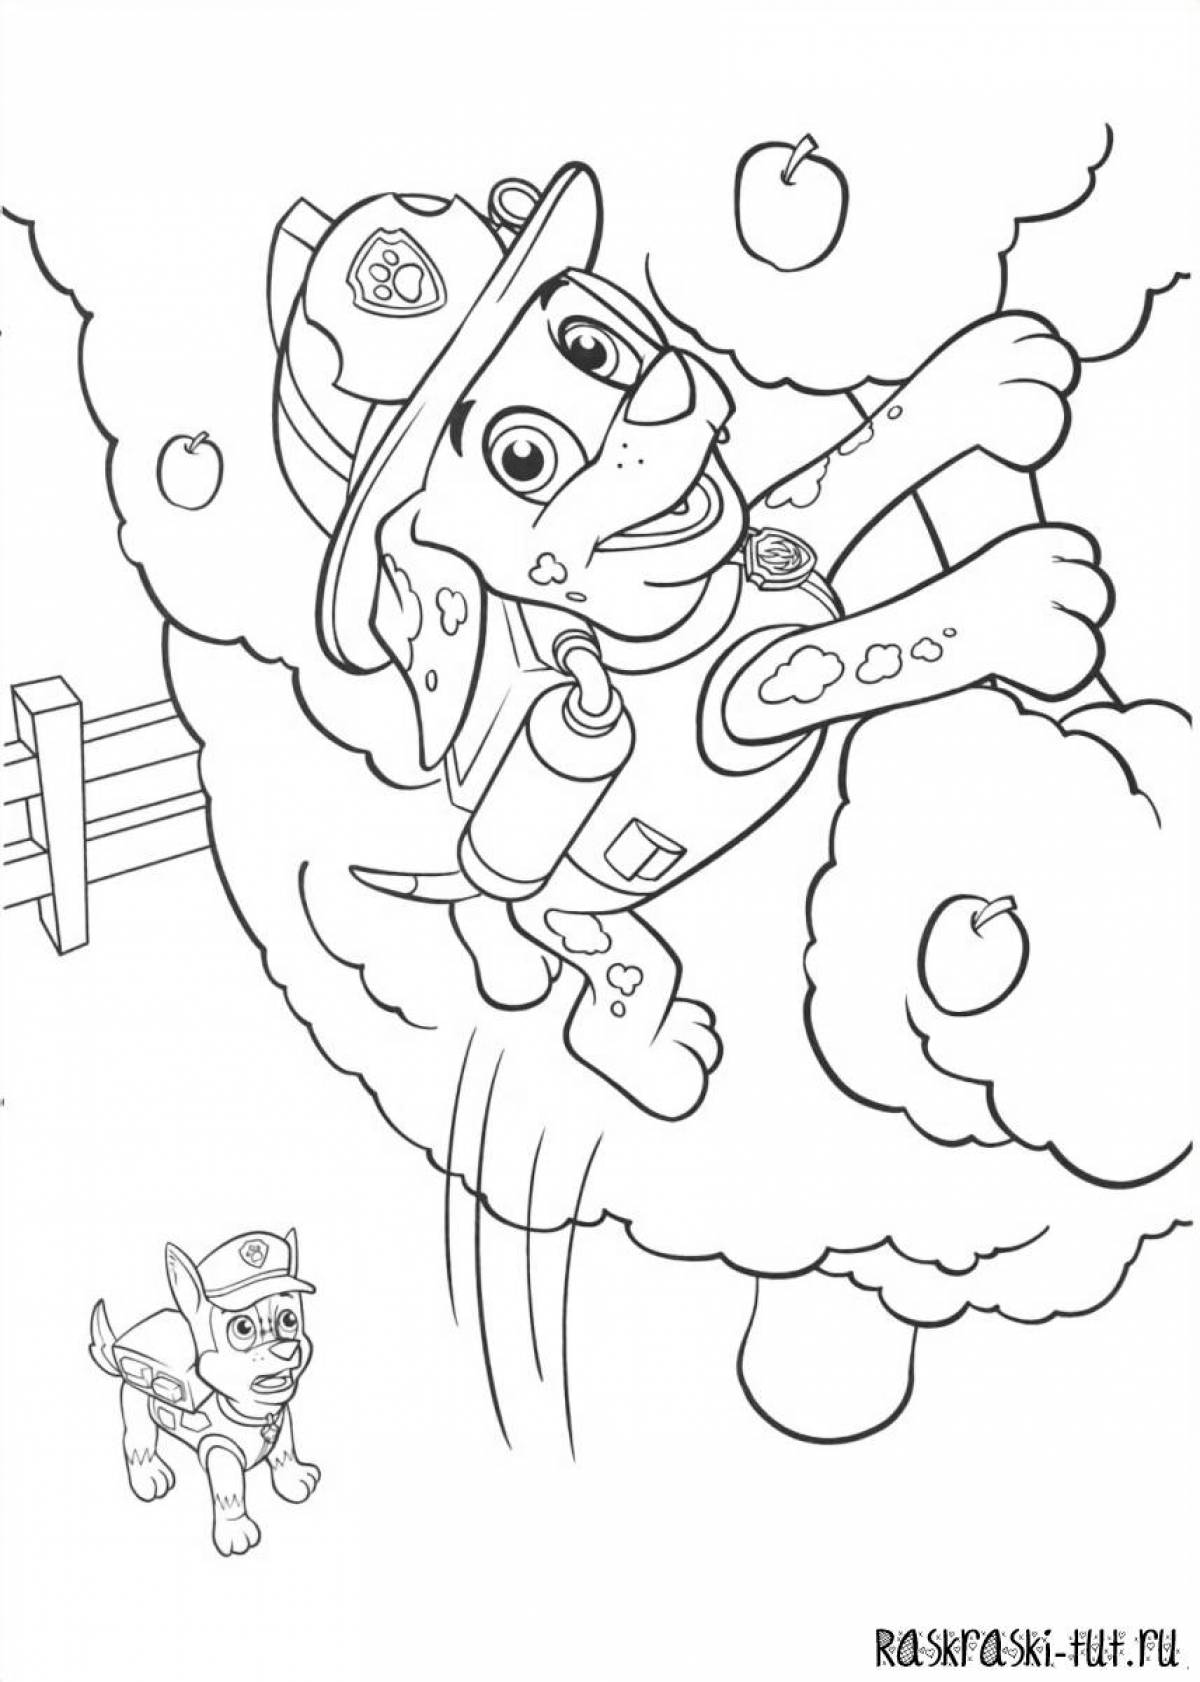 Charming marshal coloring book